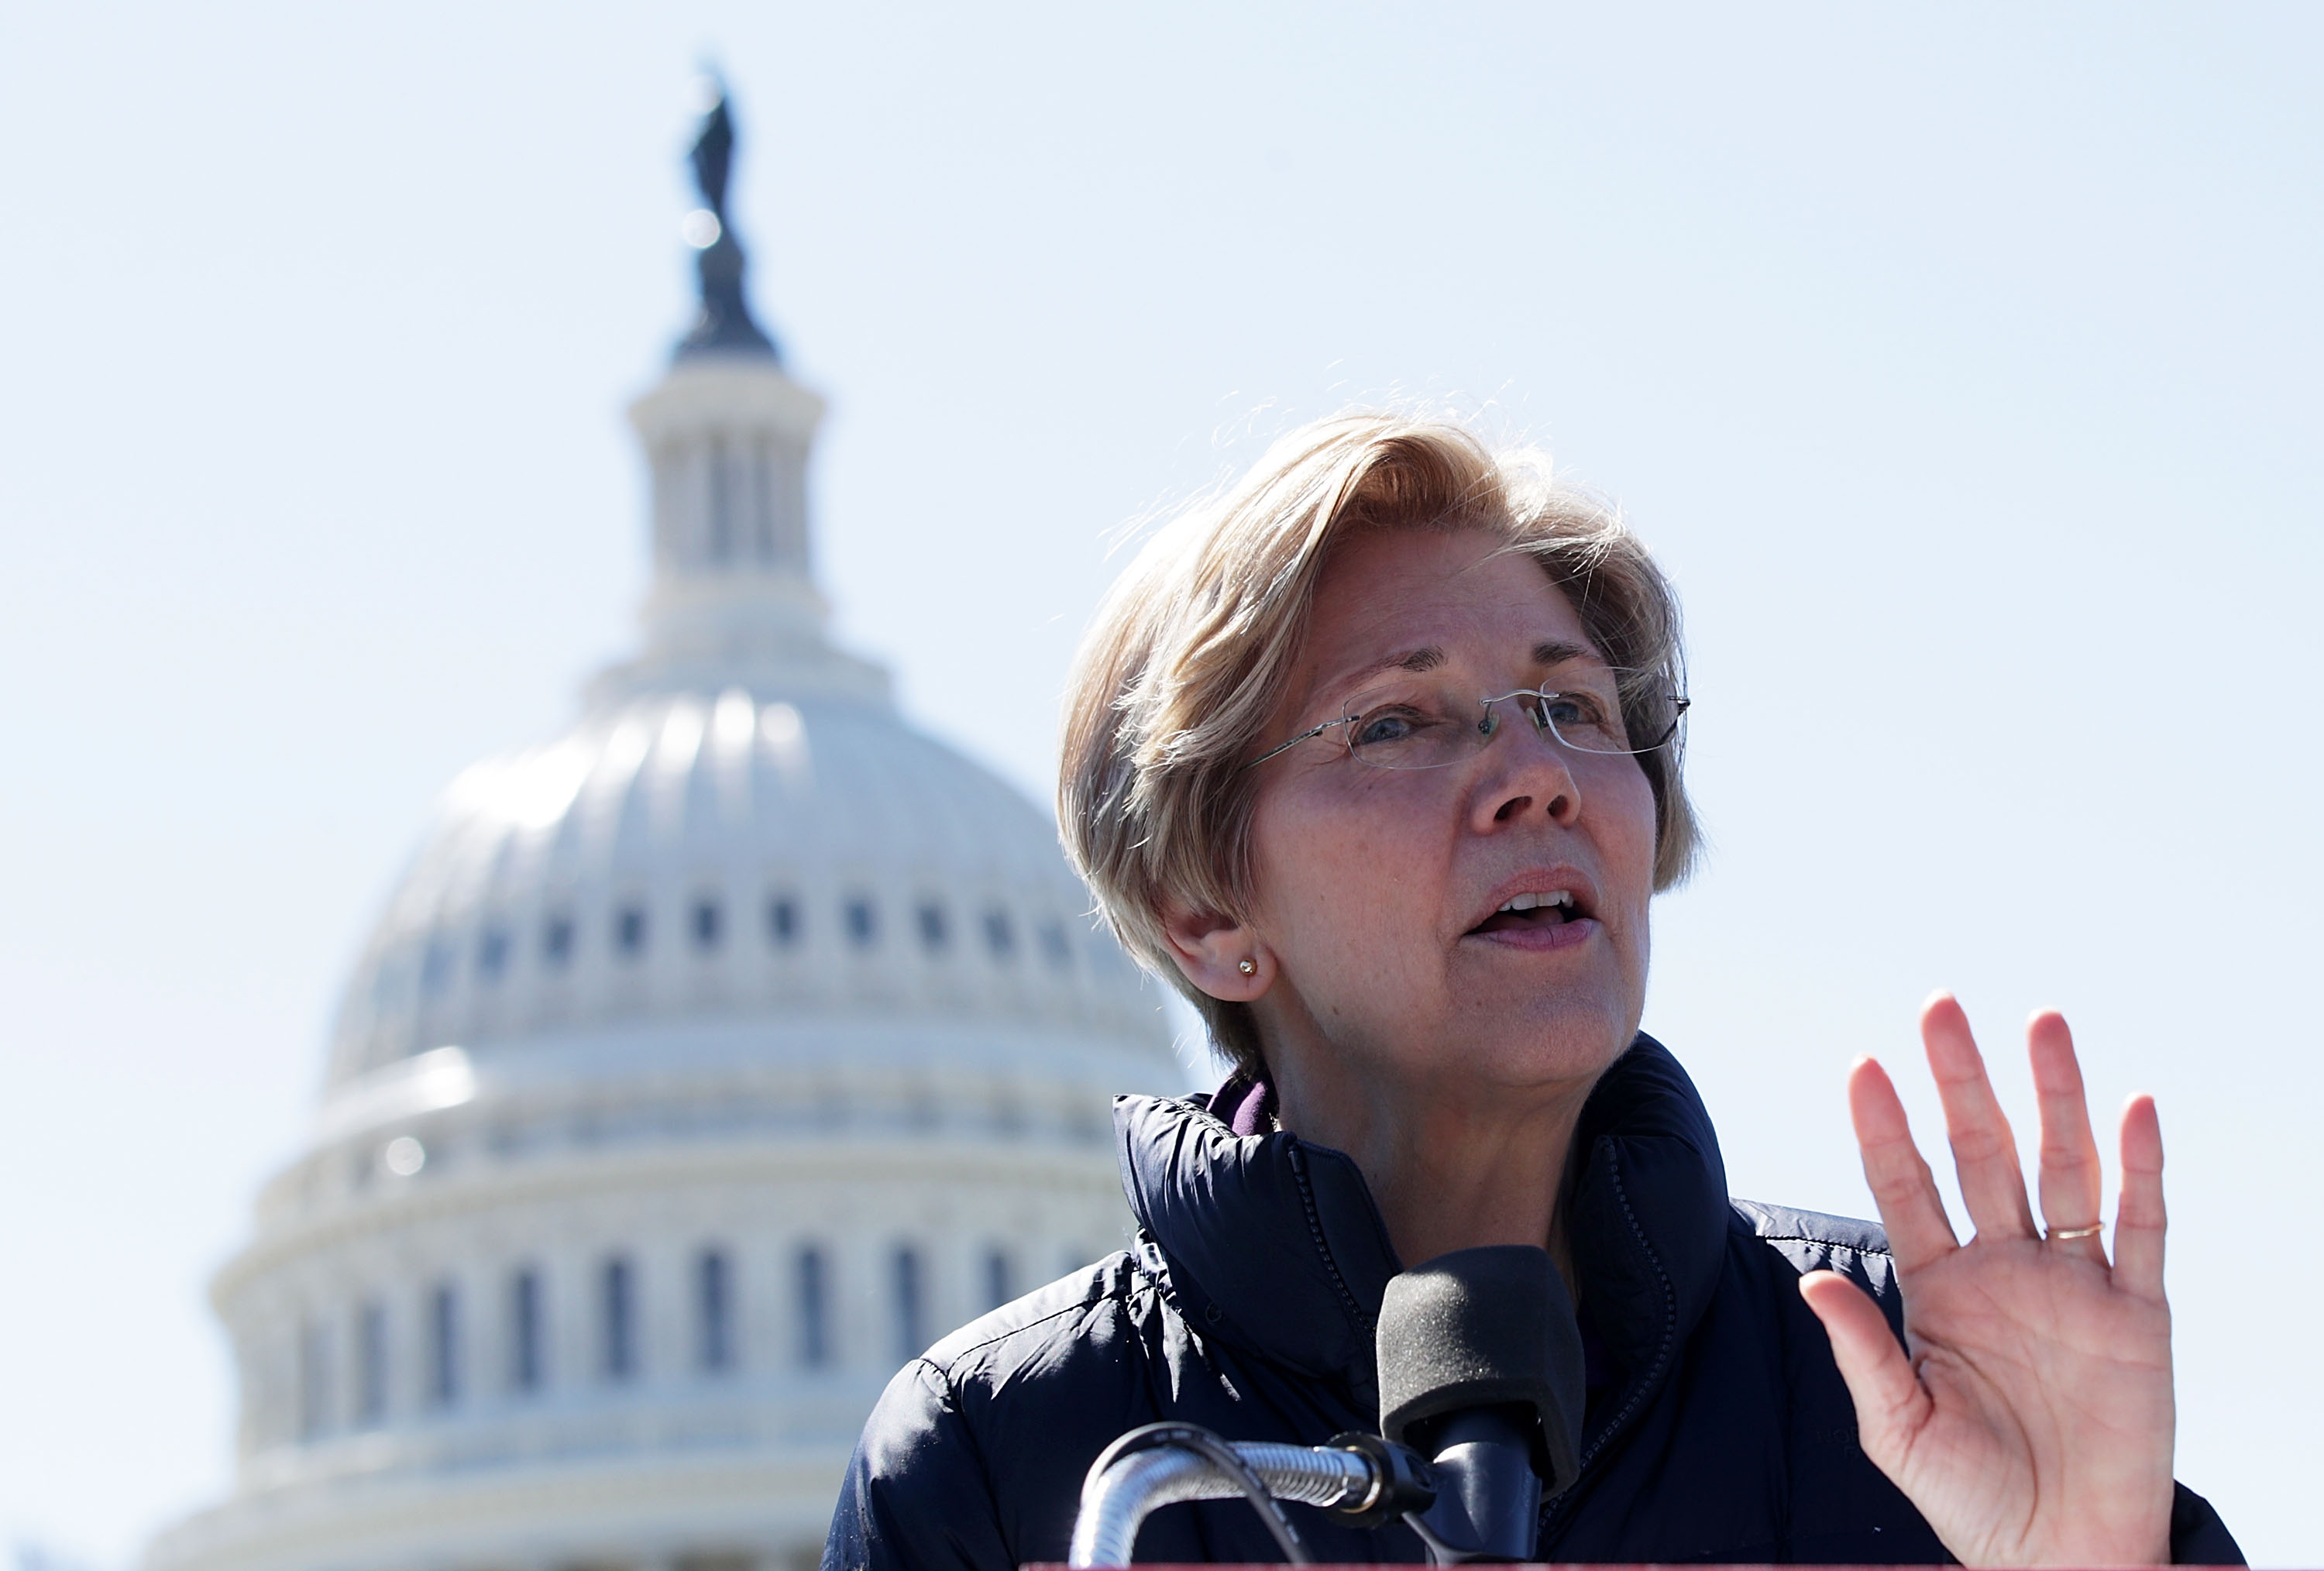 Sen. Elizabeth Warren (D-MA) speaks during a rally in front of the Capitol on March 22, 2017 in Washington, D.C. (Alex Wong/Getty Images)